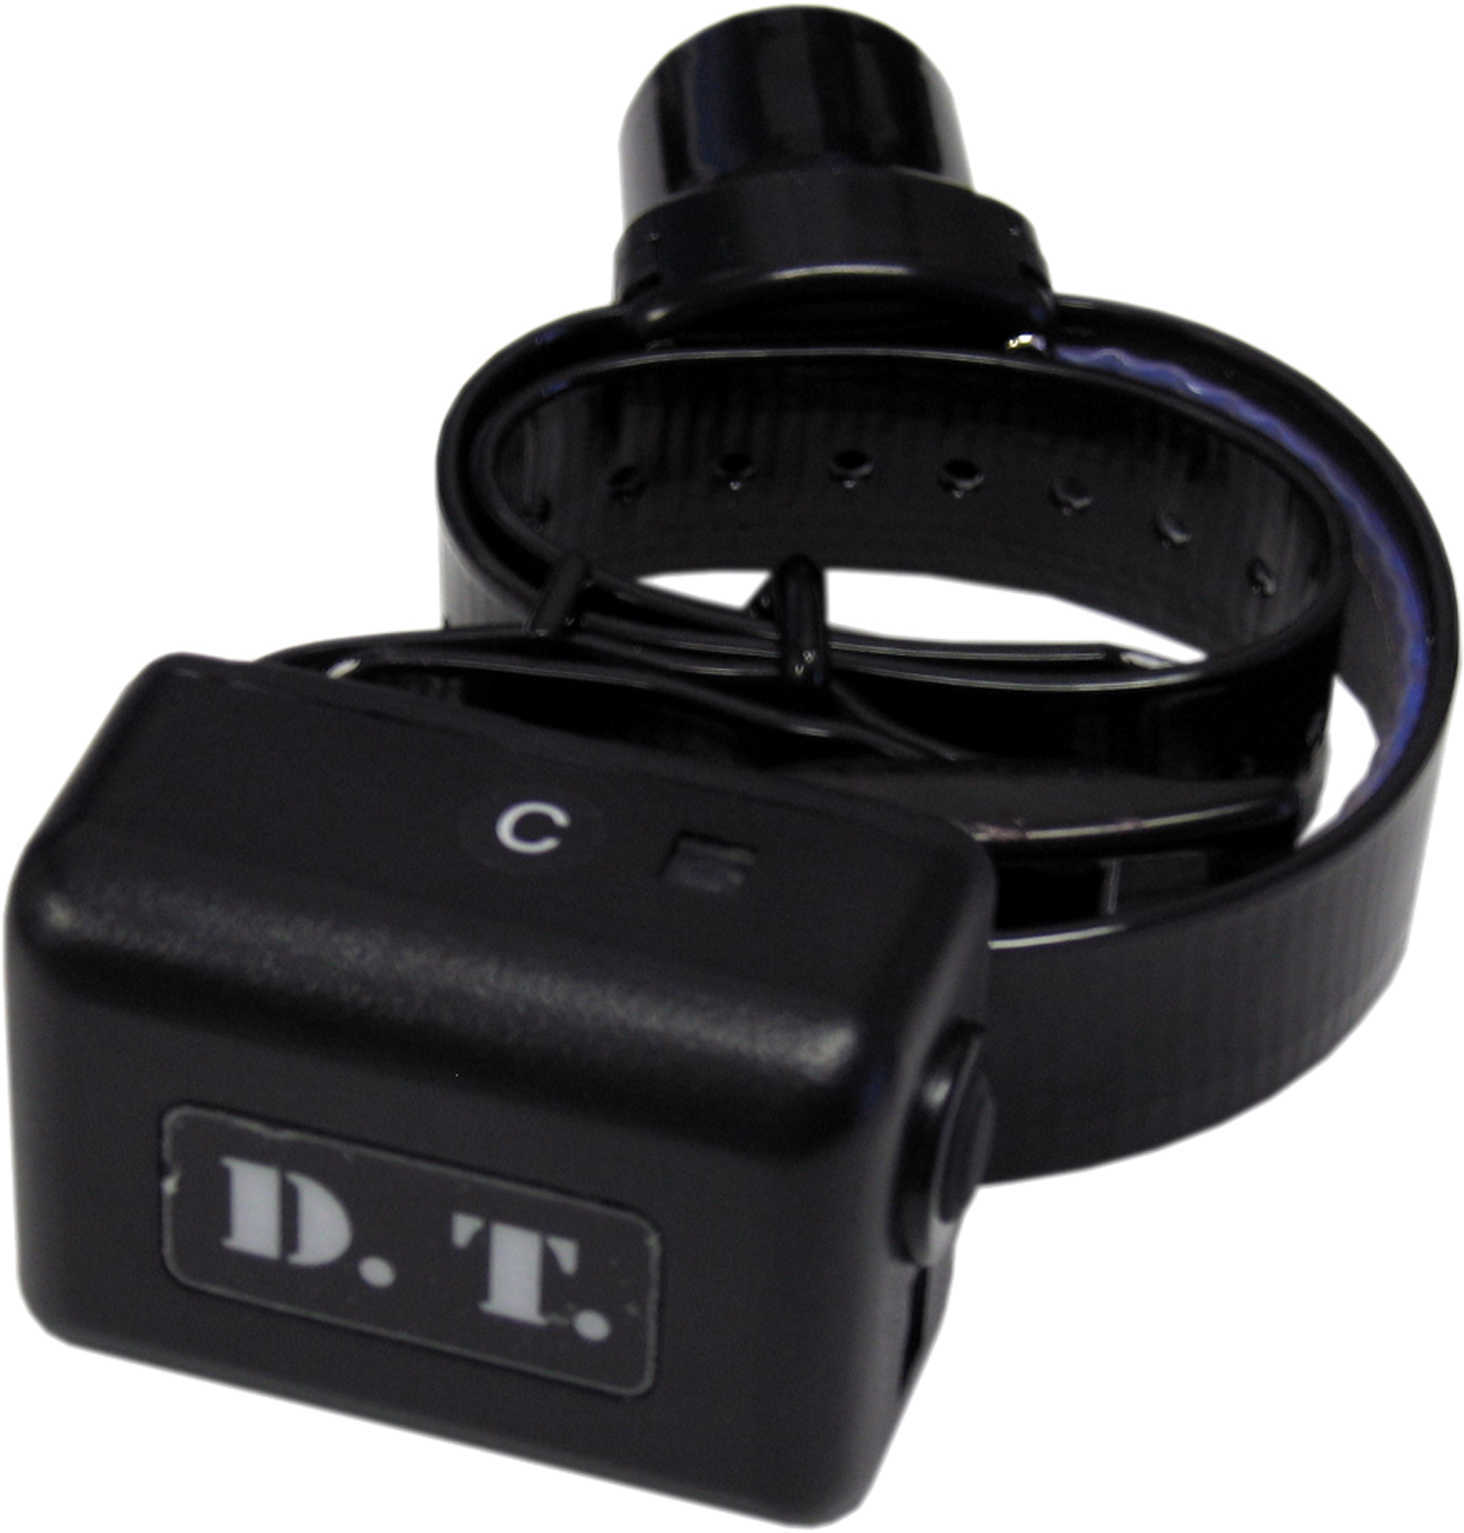 DT Systems H20 1850 Plus Collar Only Black ADDON-B